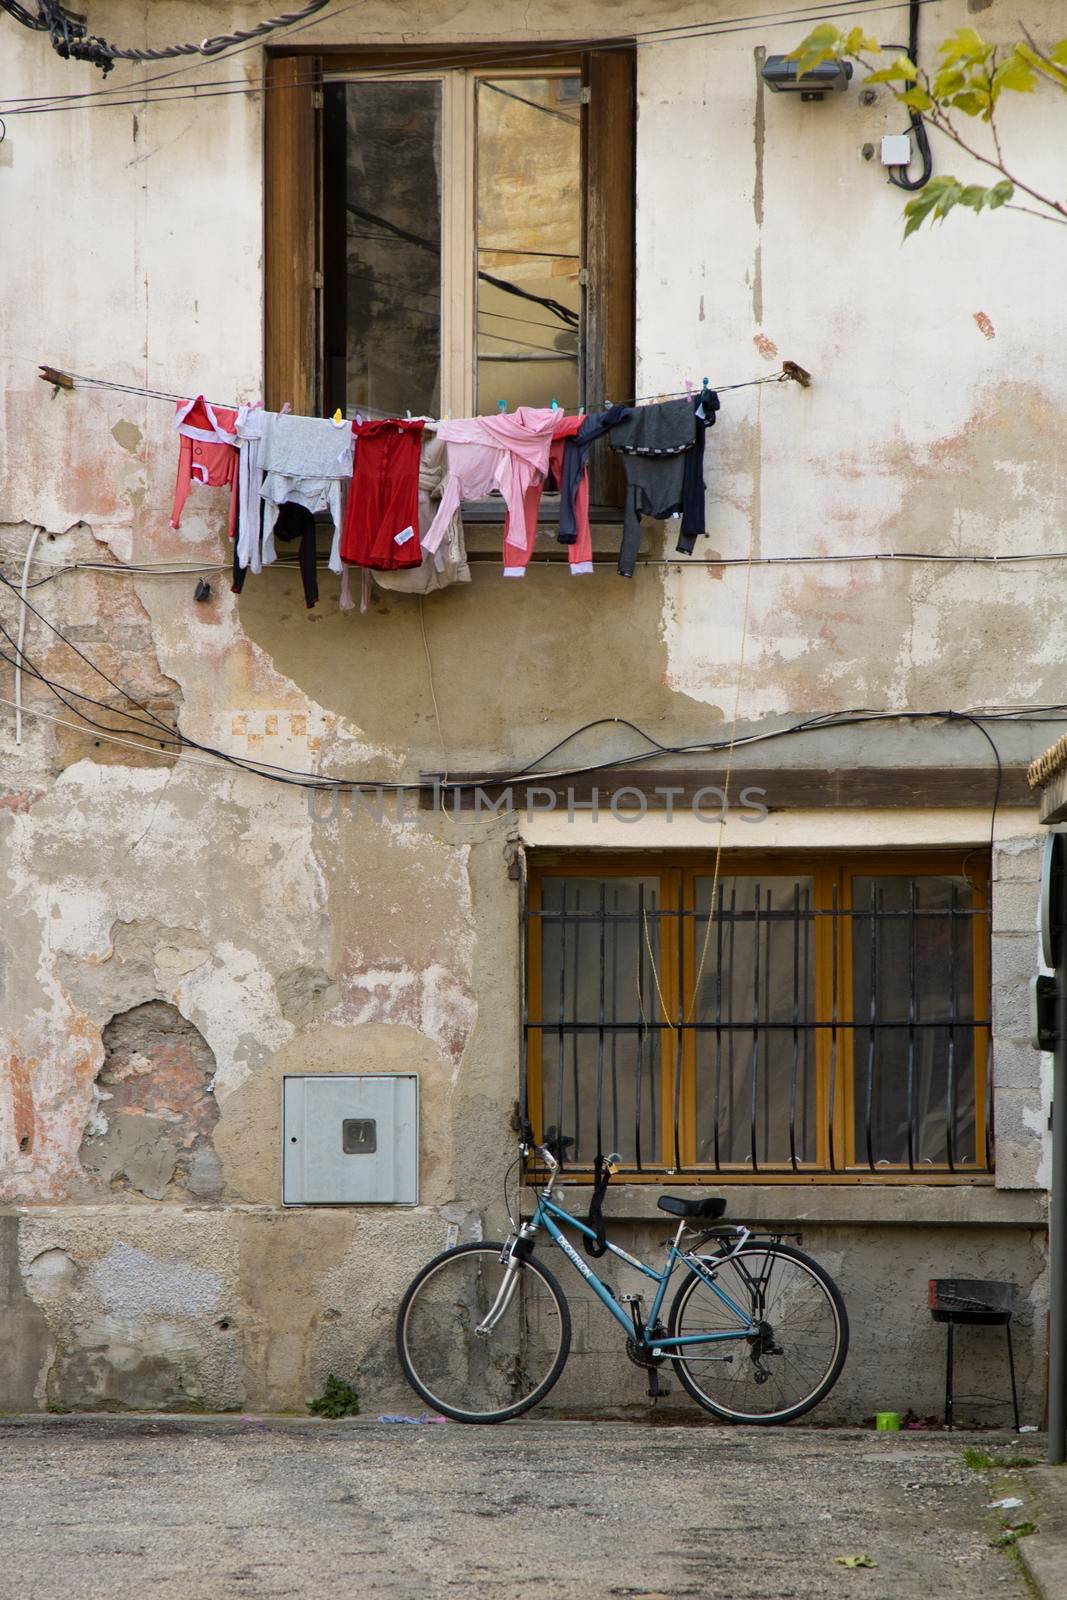 Hanging clothes over a bicycle by ValentimePix